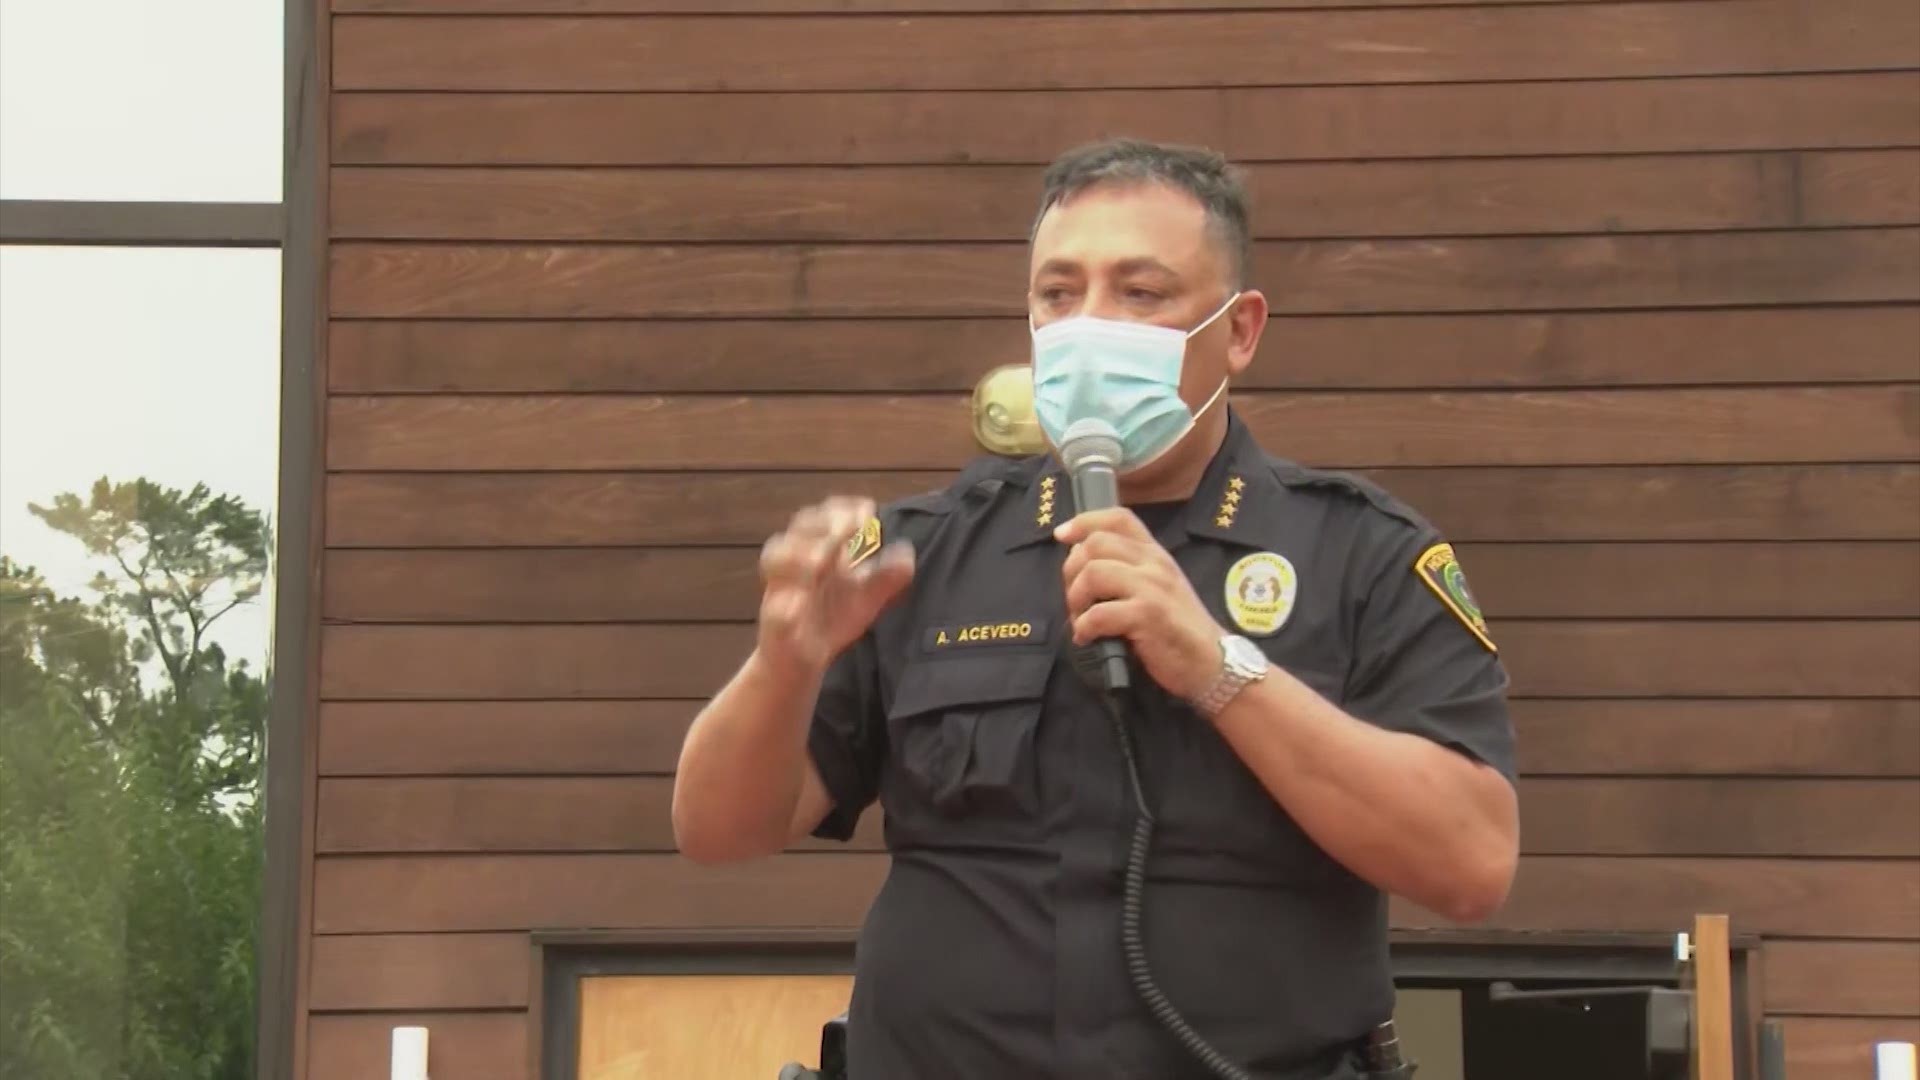 Houston Police Chief Art Acevedo delivered a passionate speech Sunday afternoon during a faith-based event honoring George Floyd in northwest Houston.